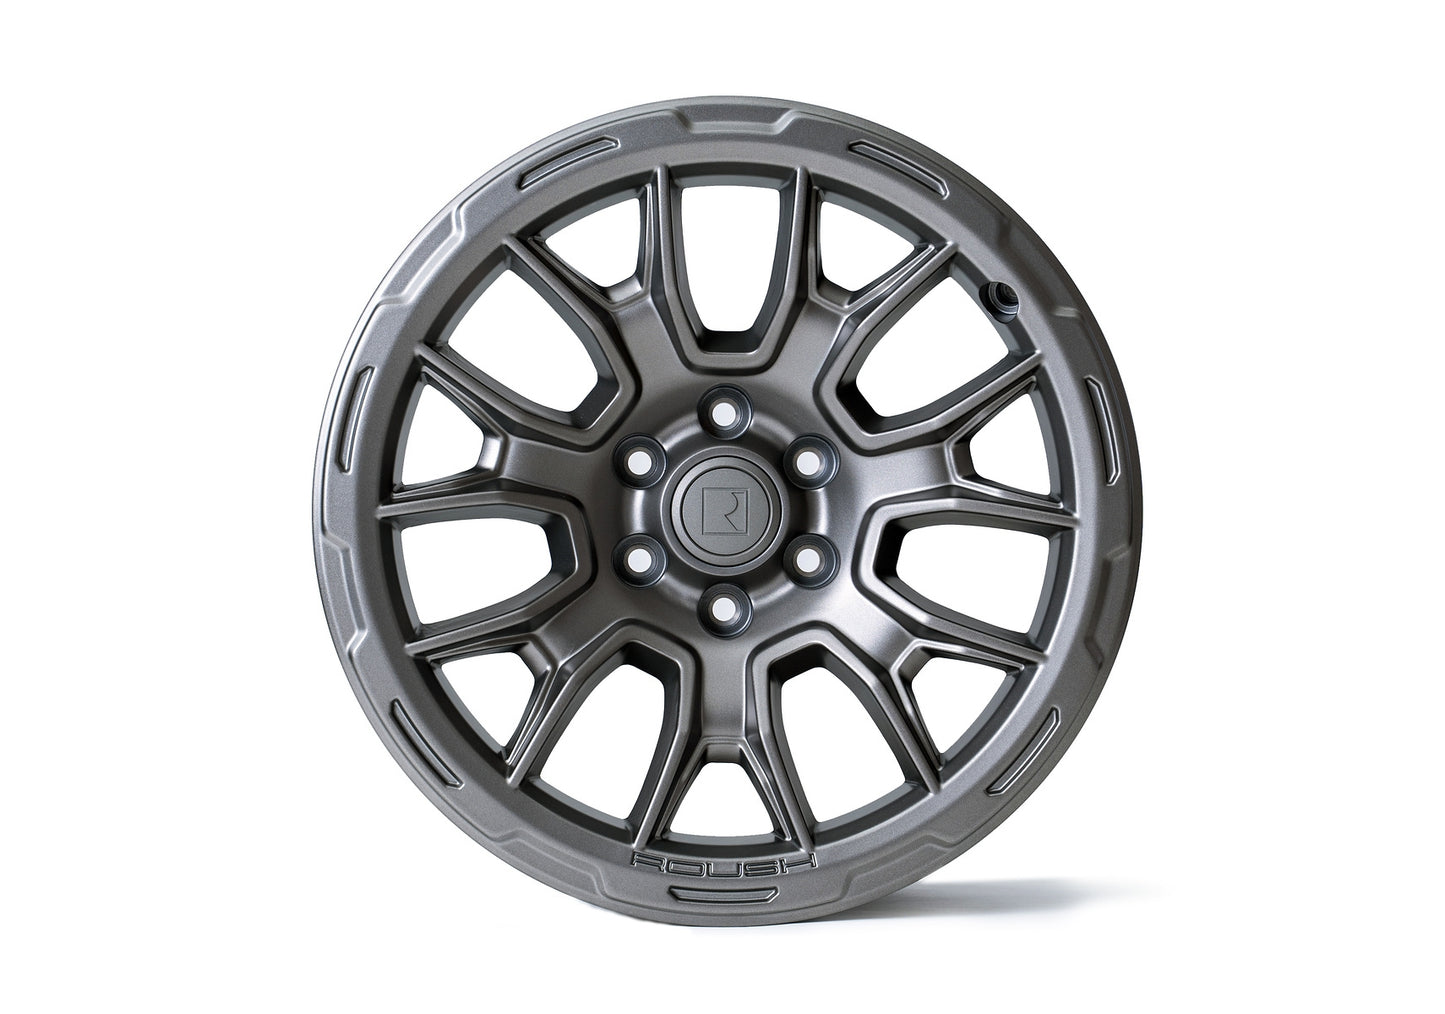 2020-2024 Roush Bronco & Ranger 17-inch Iridium Grey Wheel with a detailed multi-spoke design, isolated on a white background, resembling the style of Ford Ranger Wheels.